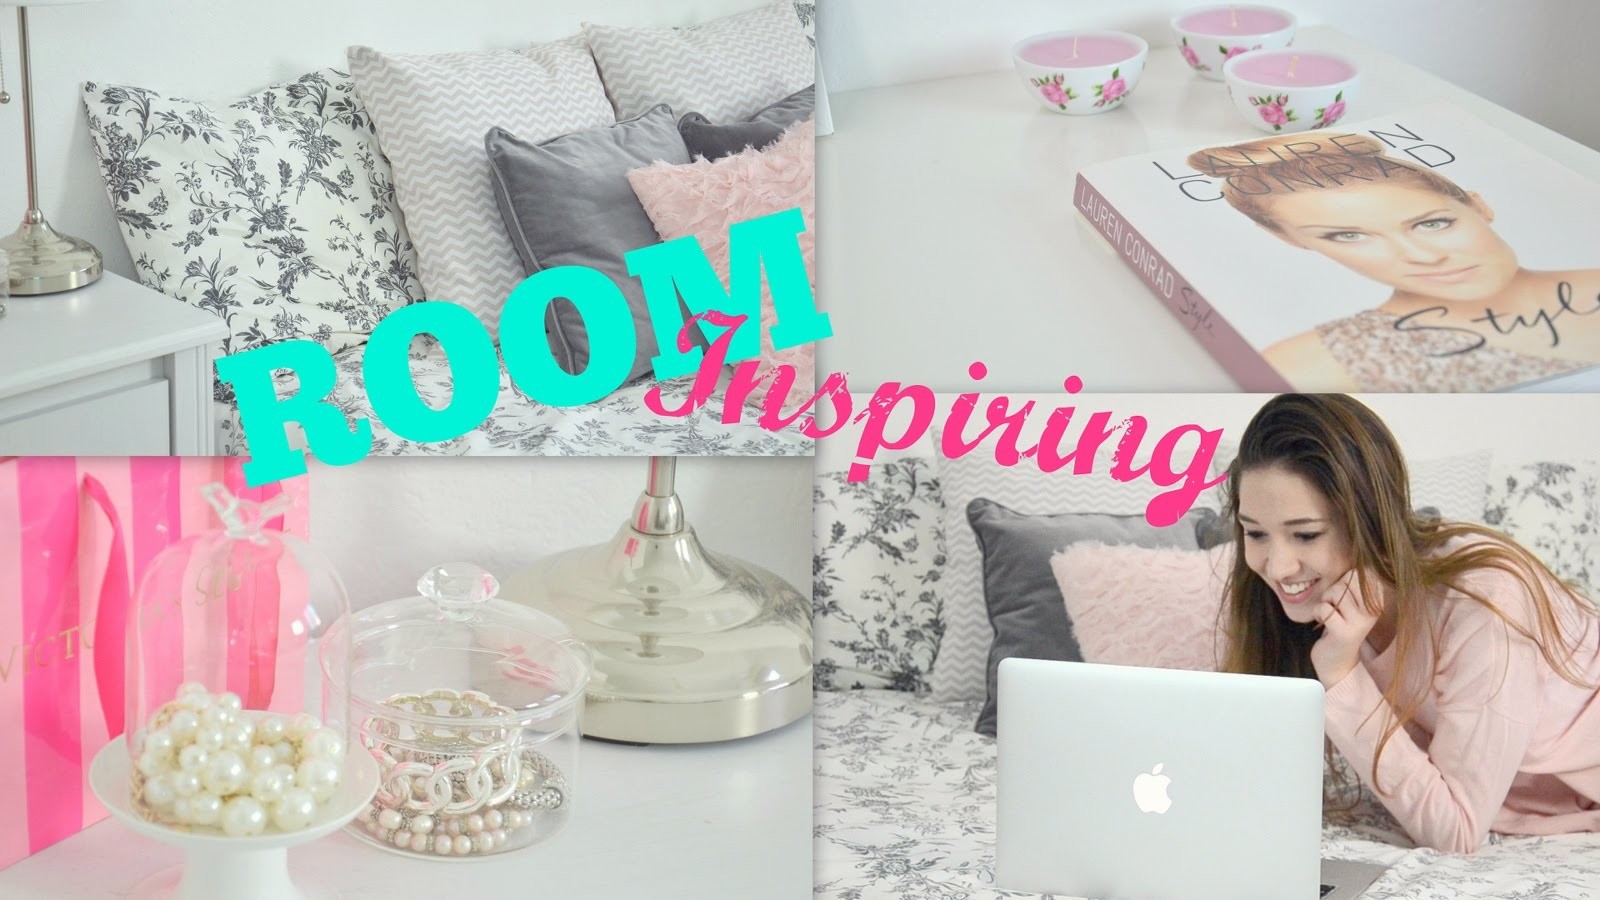 Room Inspiring - Easy ways to decorate your room ♥